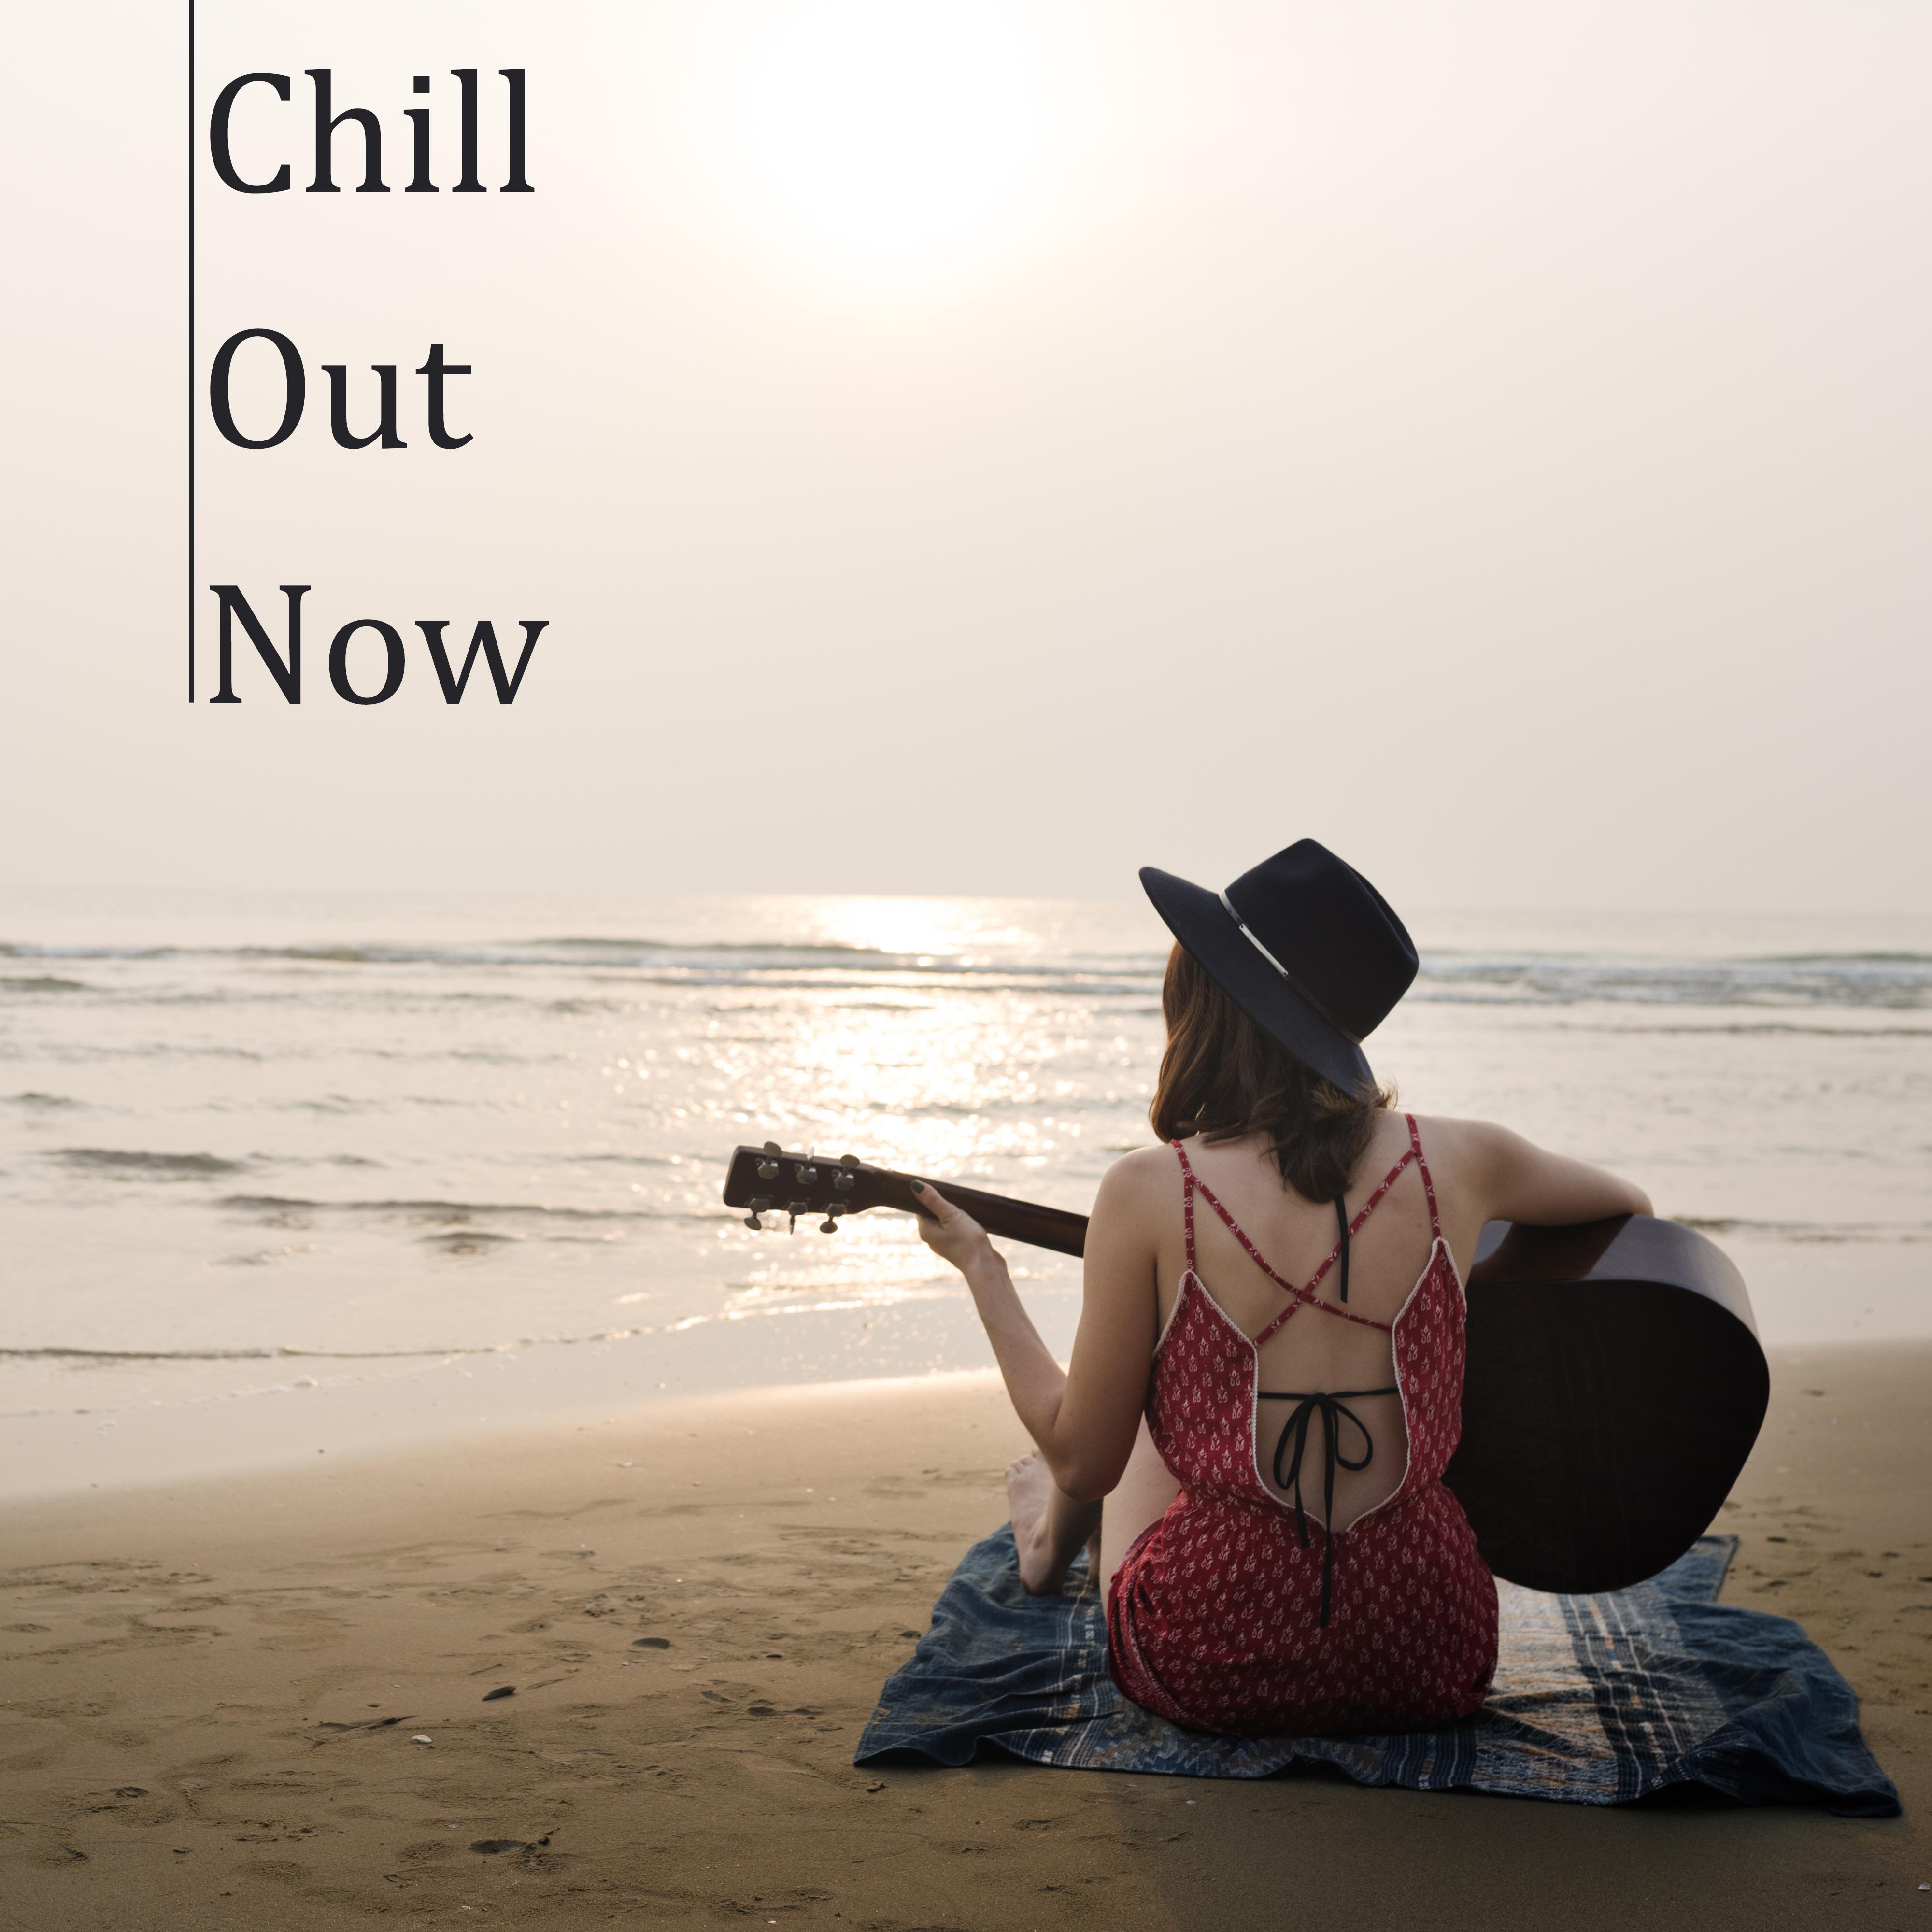 Chill Out Now